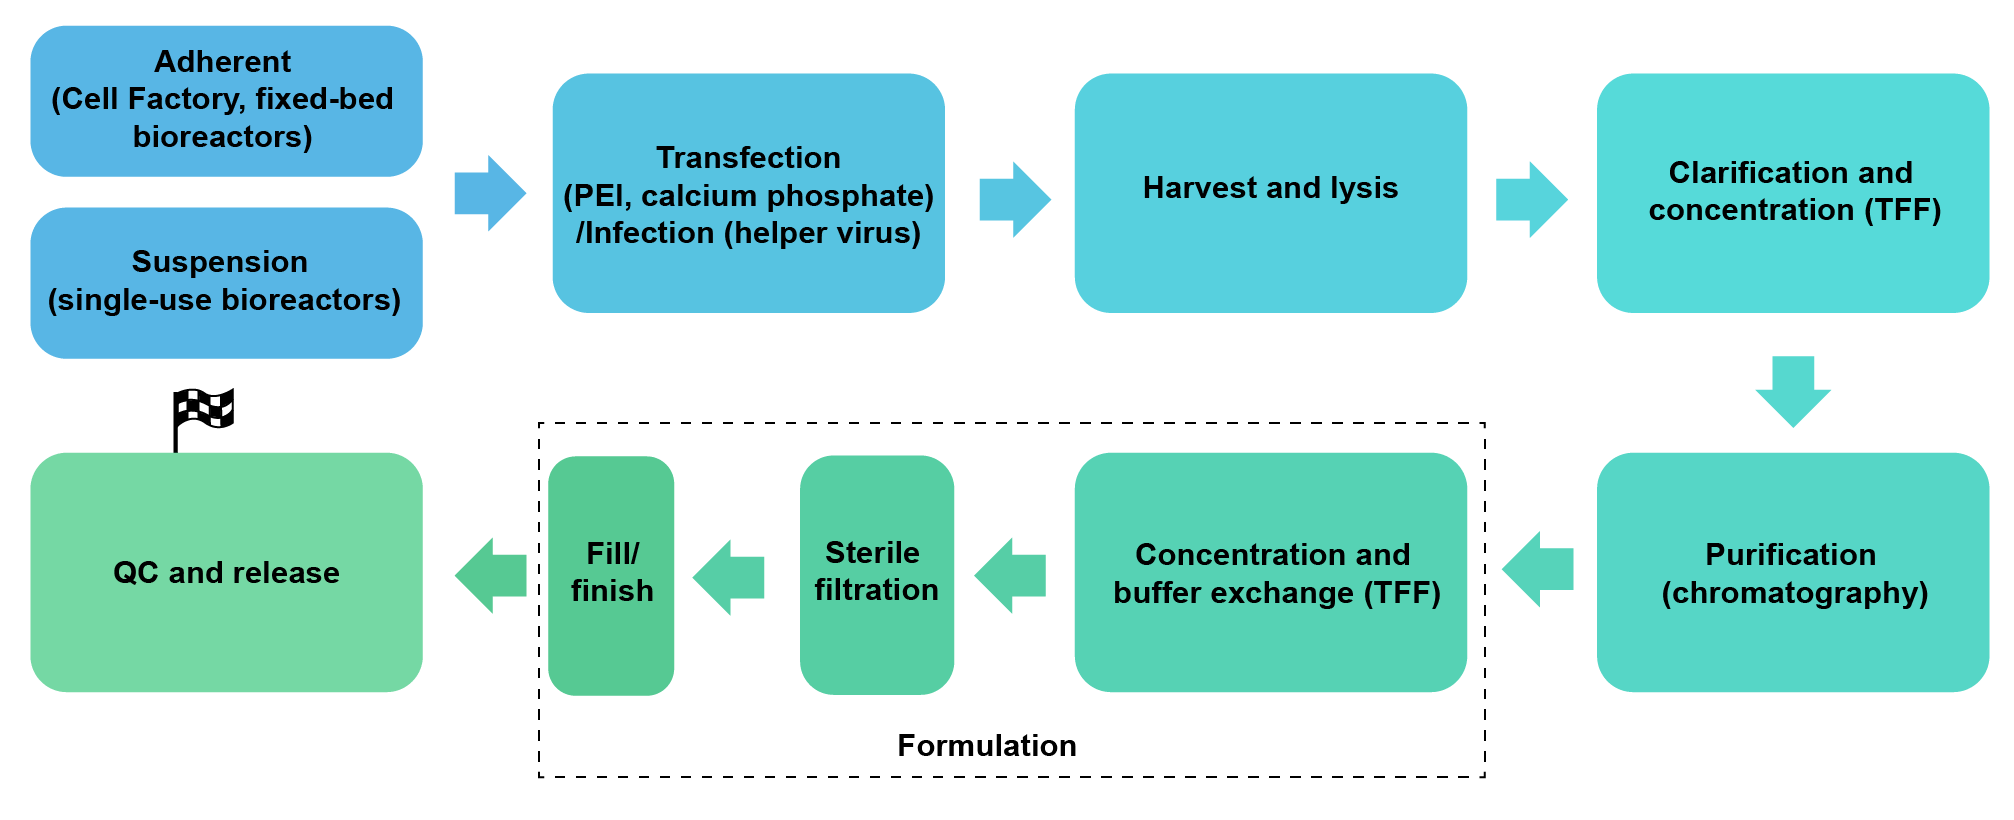 Adherent/Suspension > Transfection > Harvest and lysis > Clarification and concentration (TFF) > Purification > Formulation > QC.